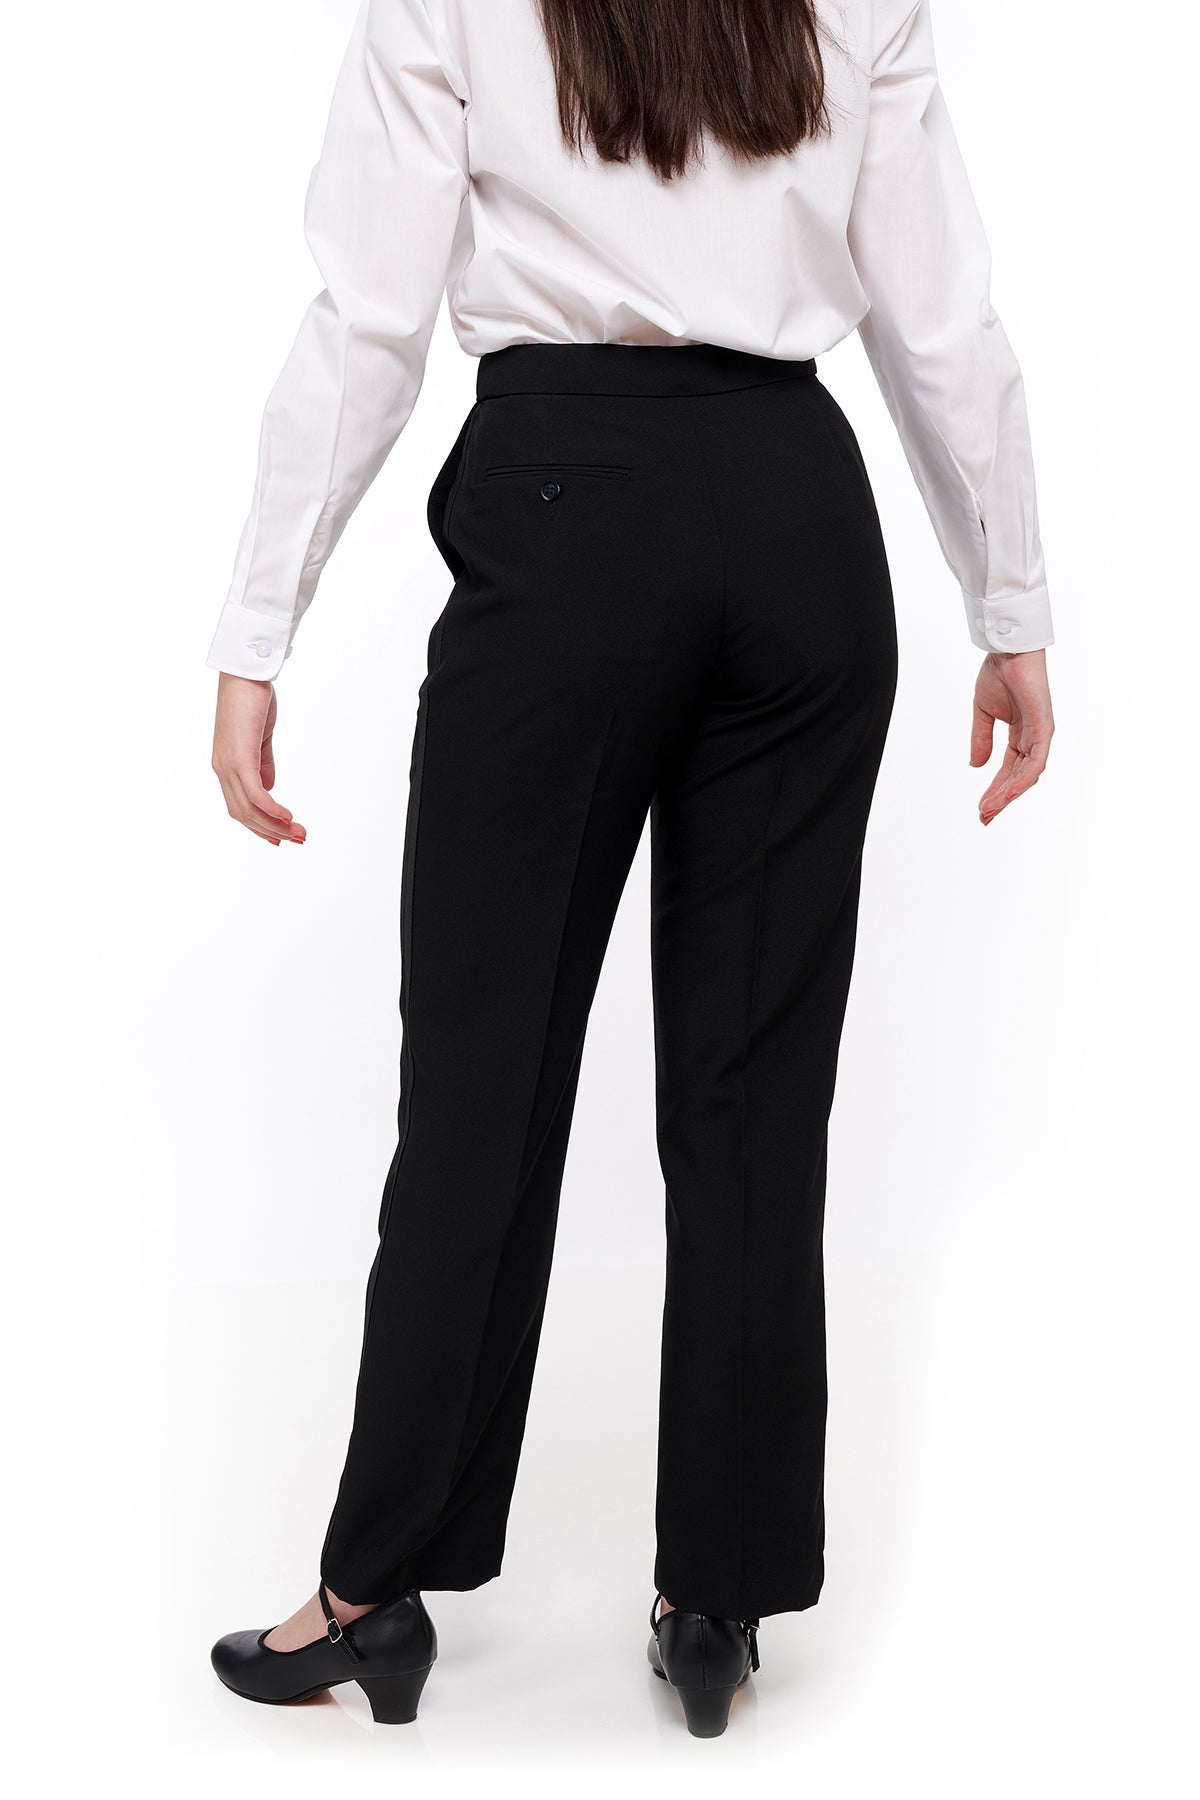 Women Trousers & pants in a various styles supplier